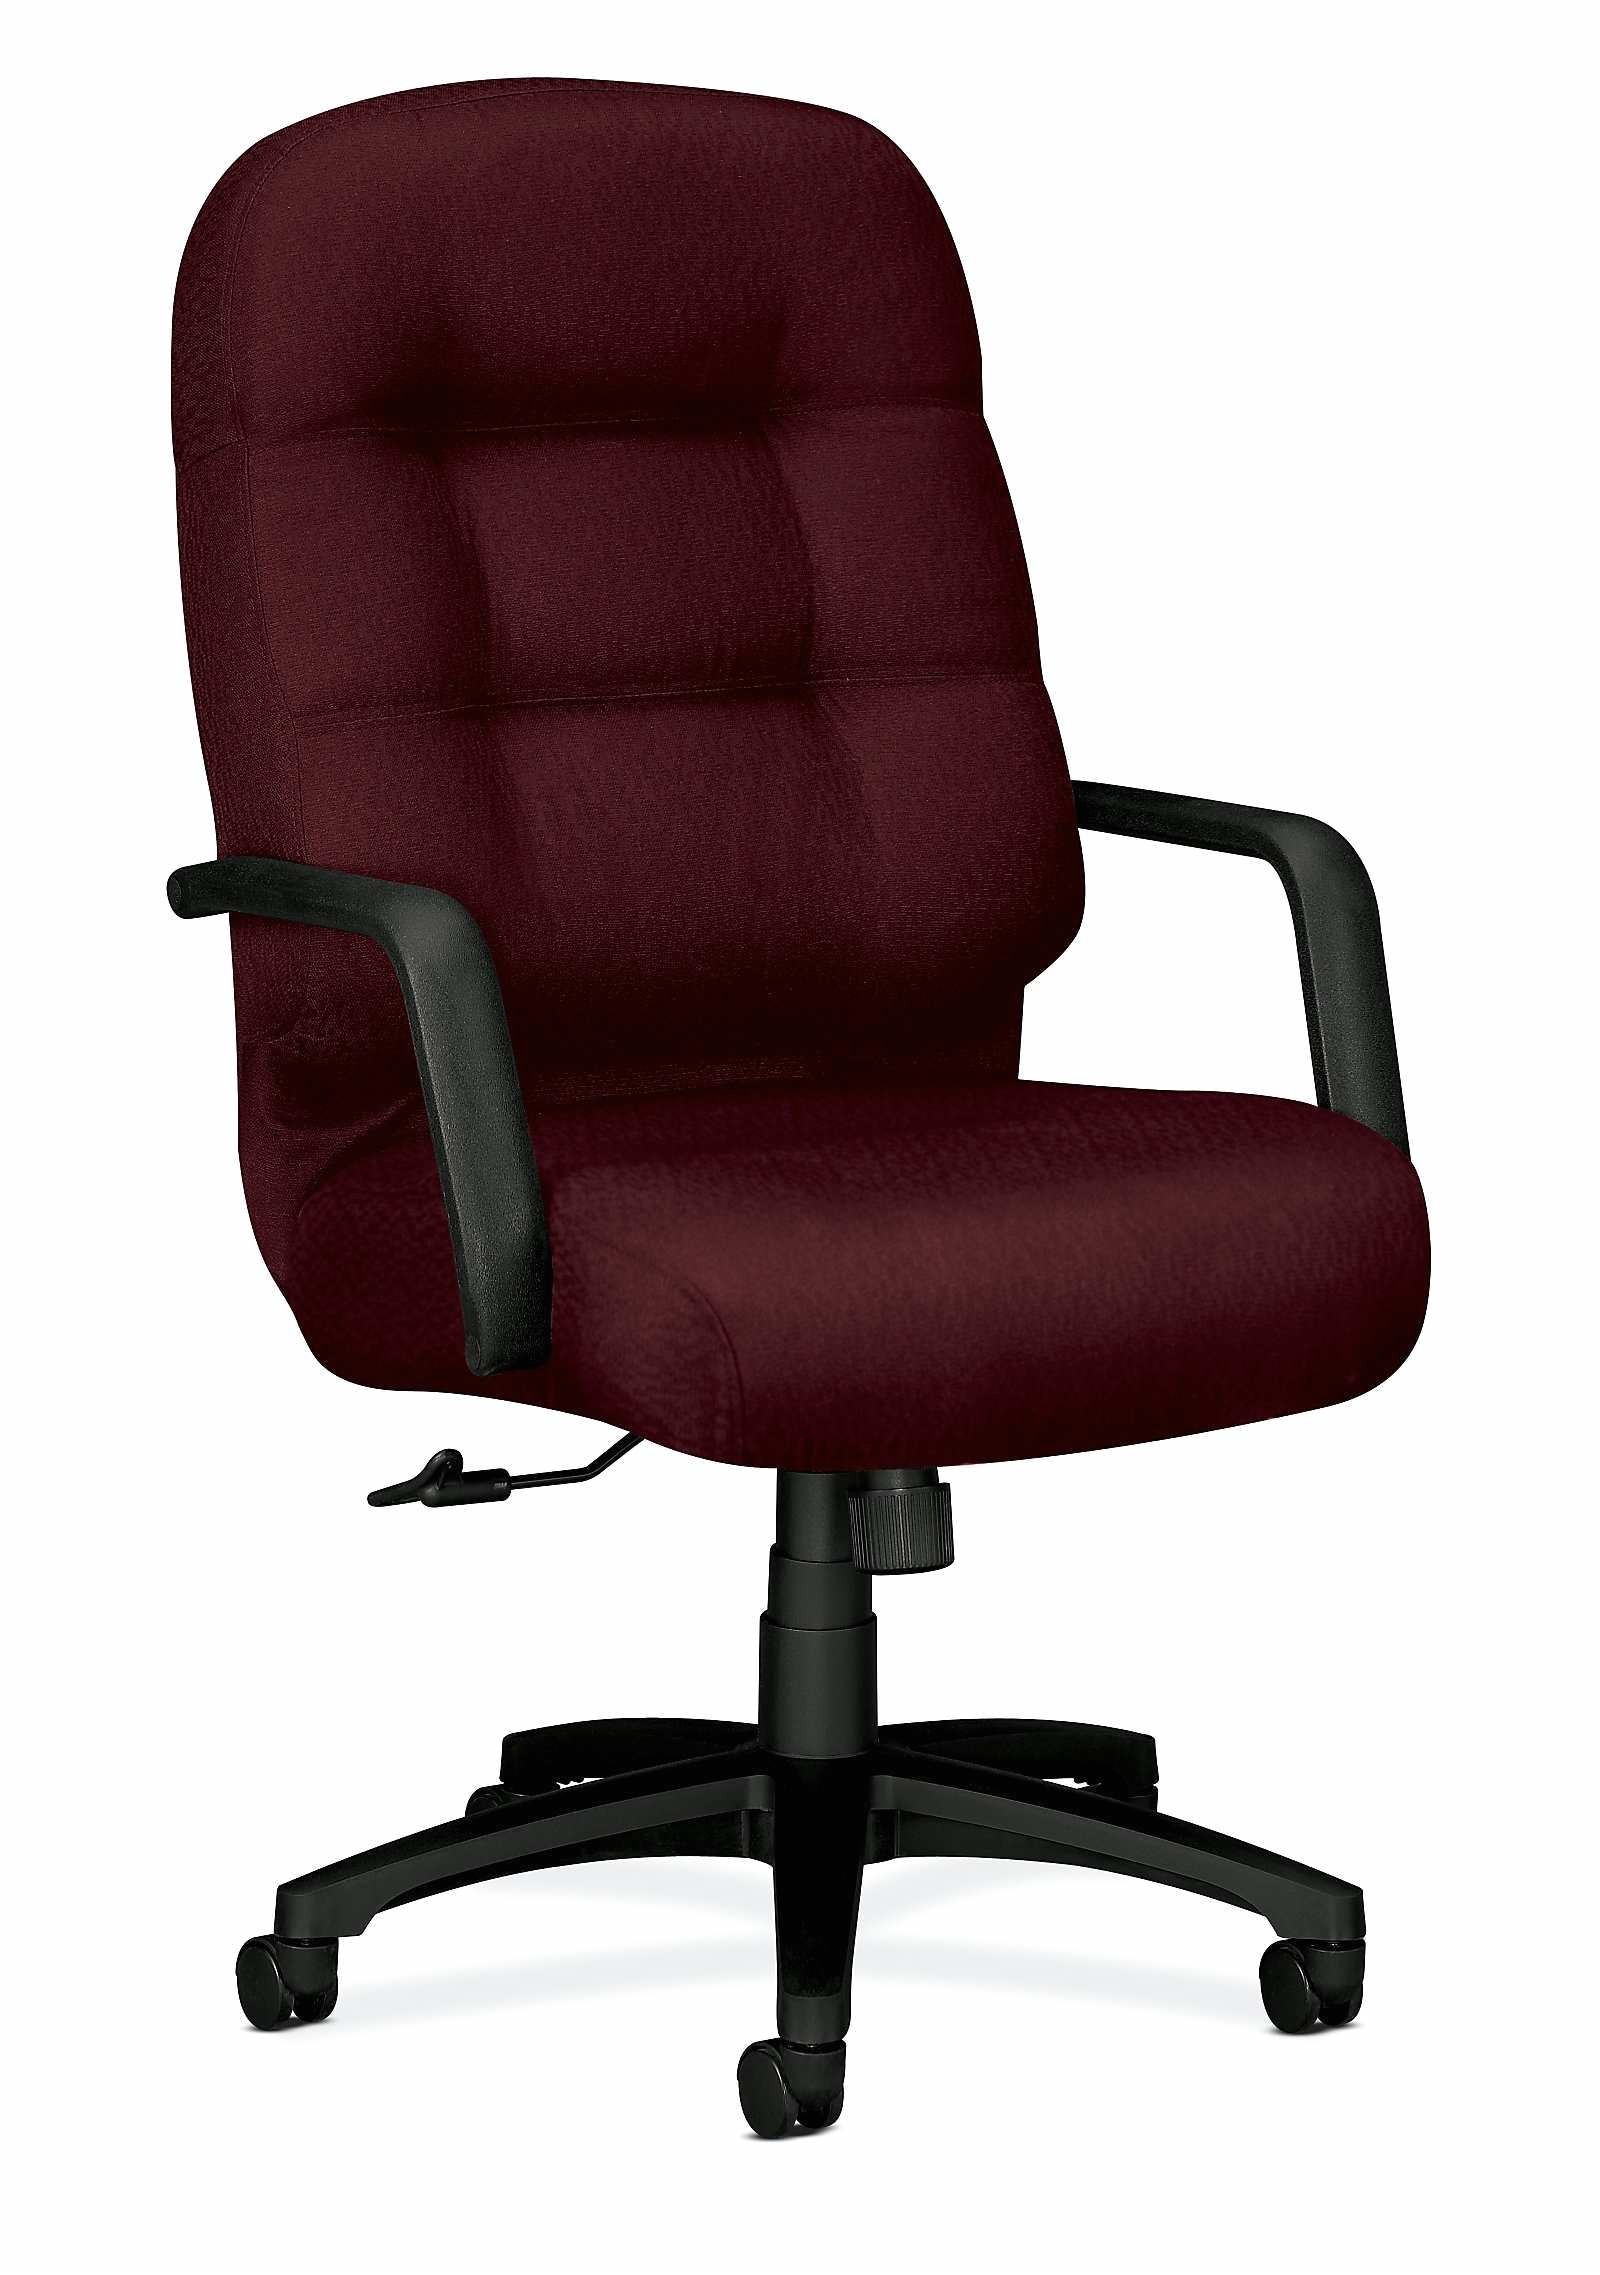 Best Office Chair for 300 Lbs Office Chair 300 Lbs Inspirational Pillow soft Model